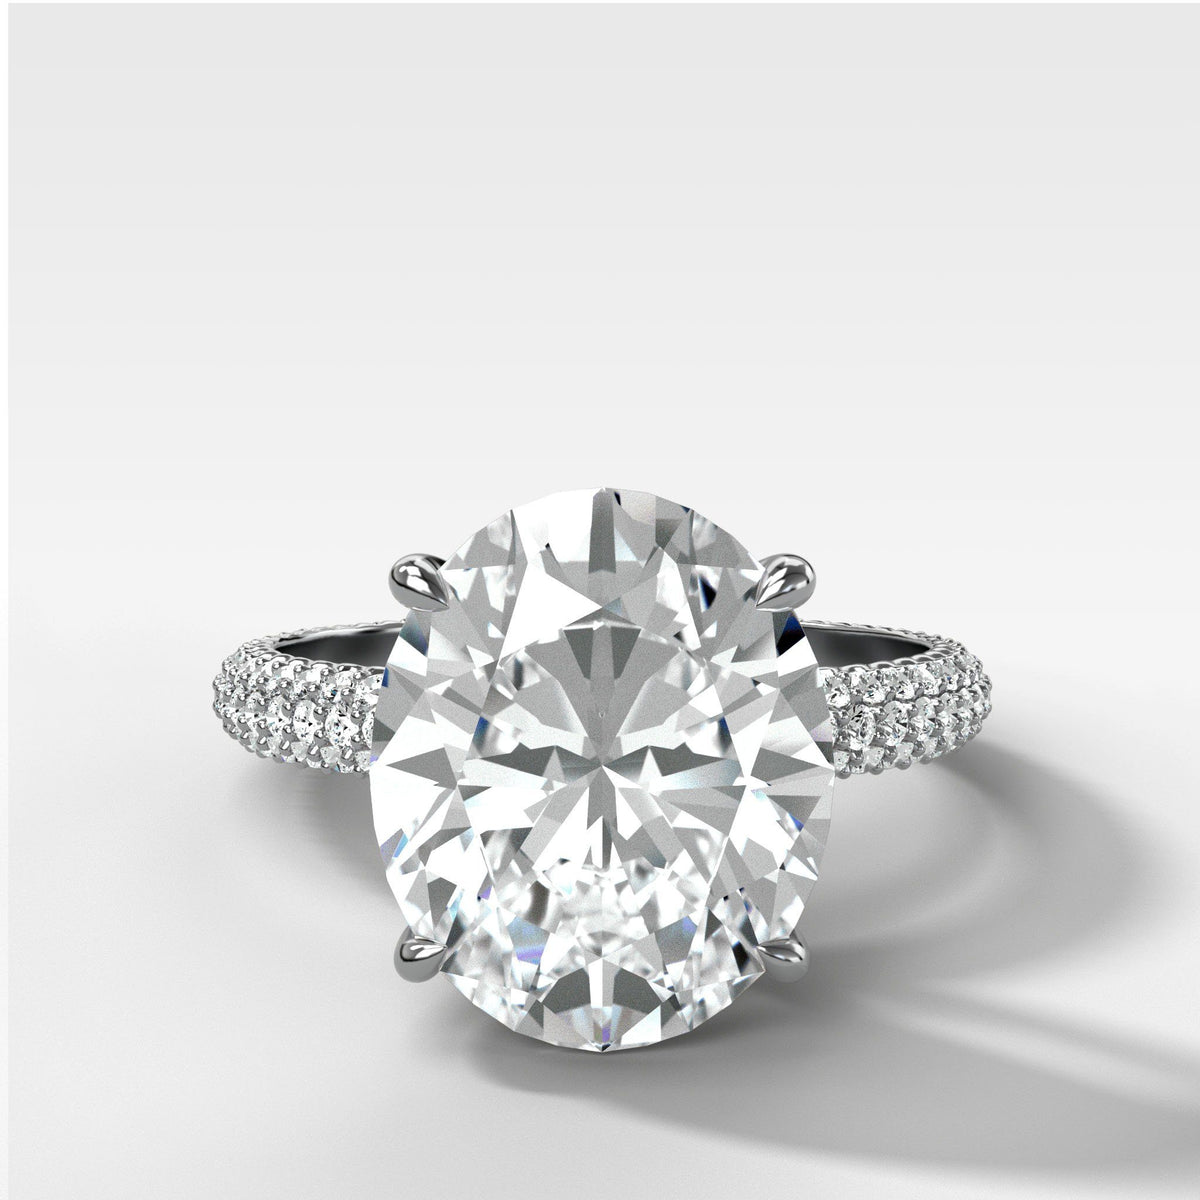 Triple Row Pav≈Ω Engagement Ring With Oval Cut by Good Stone in White Gold